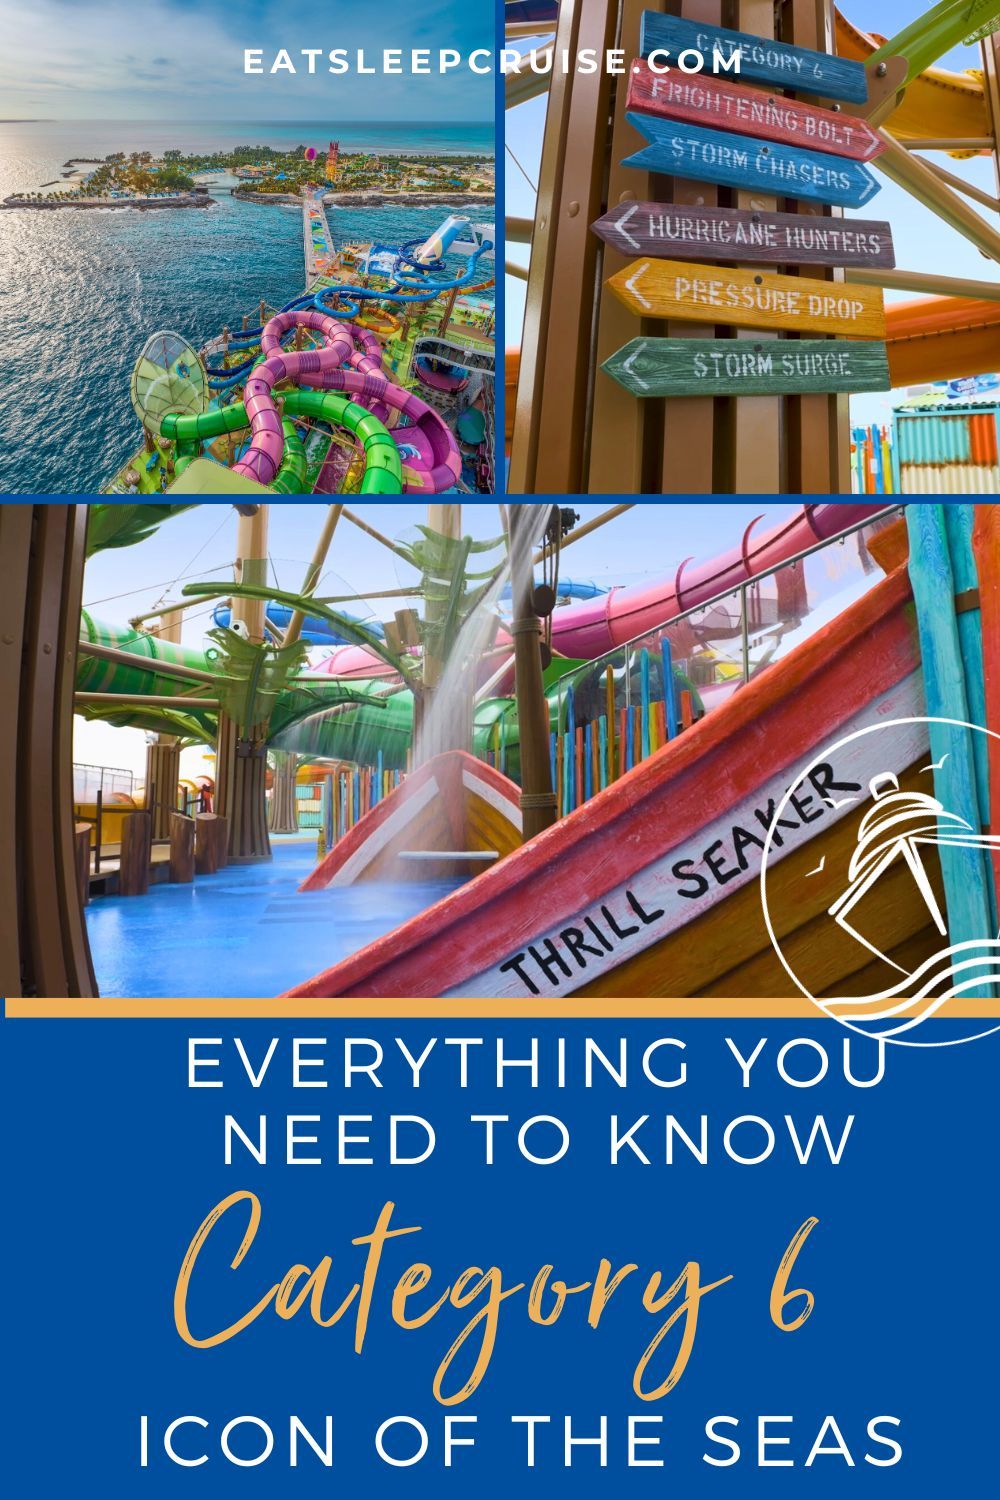 Everything You Need to Know About Category 6 Waterpark on Icon of the Seas